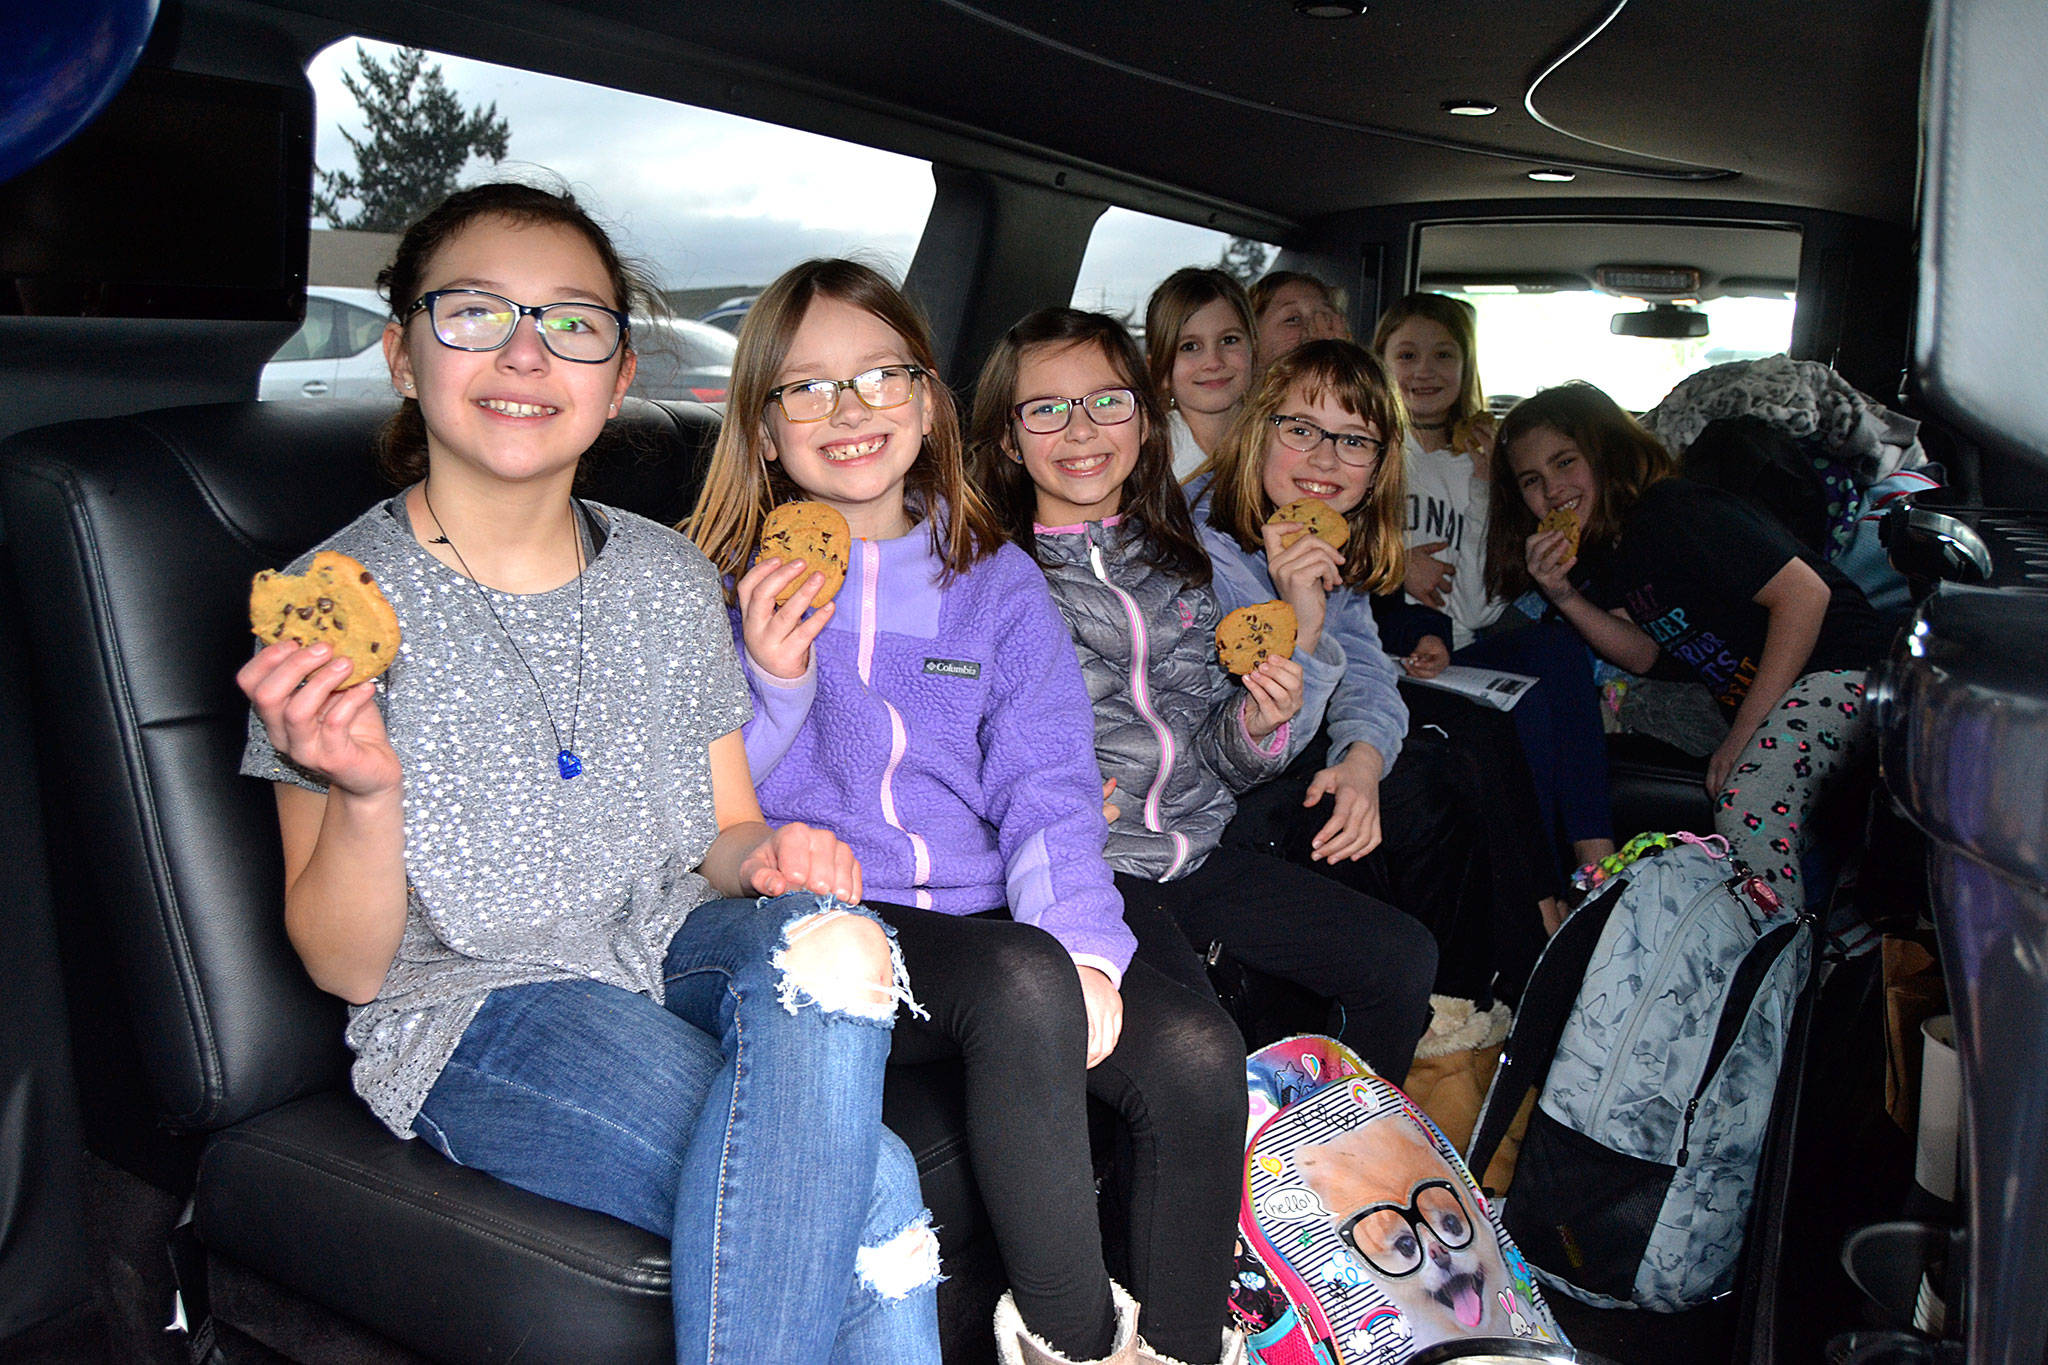 Fourth grader Maci Evans, left, readies for a limo ride with her friends on Feb. 24 after receiving the most financial support for grades 3-5 at last November’s Turkey Trot. Sequim Gazette photo by Matthew Nash